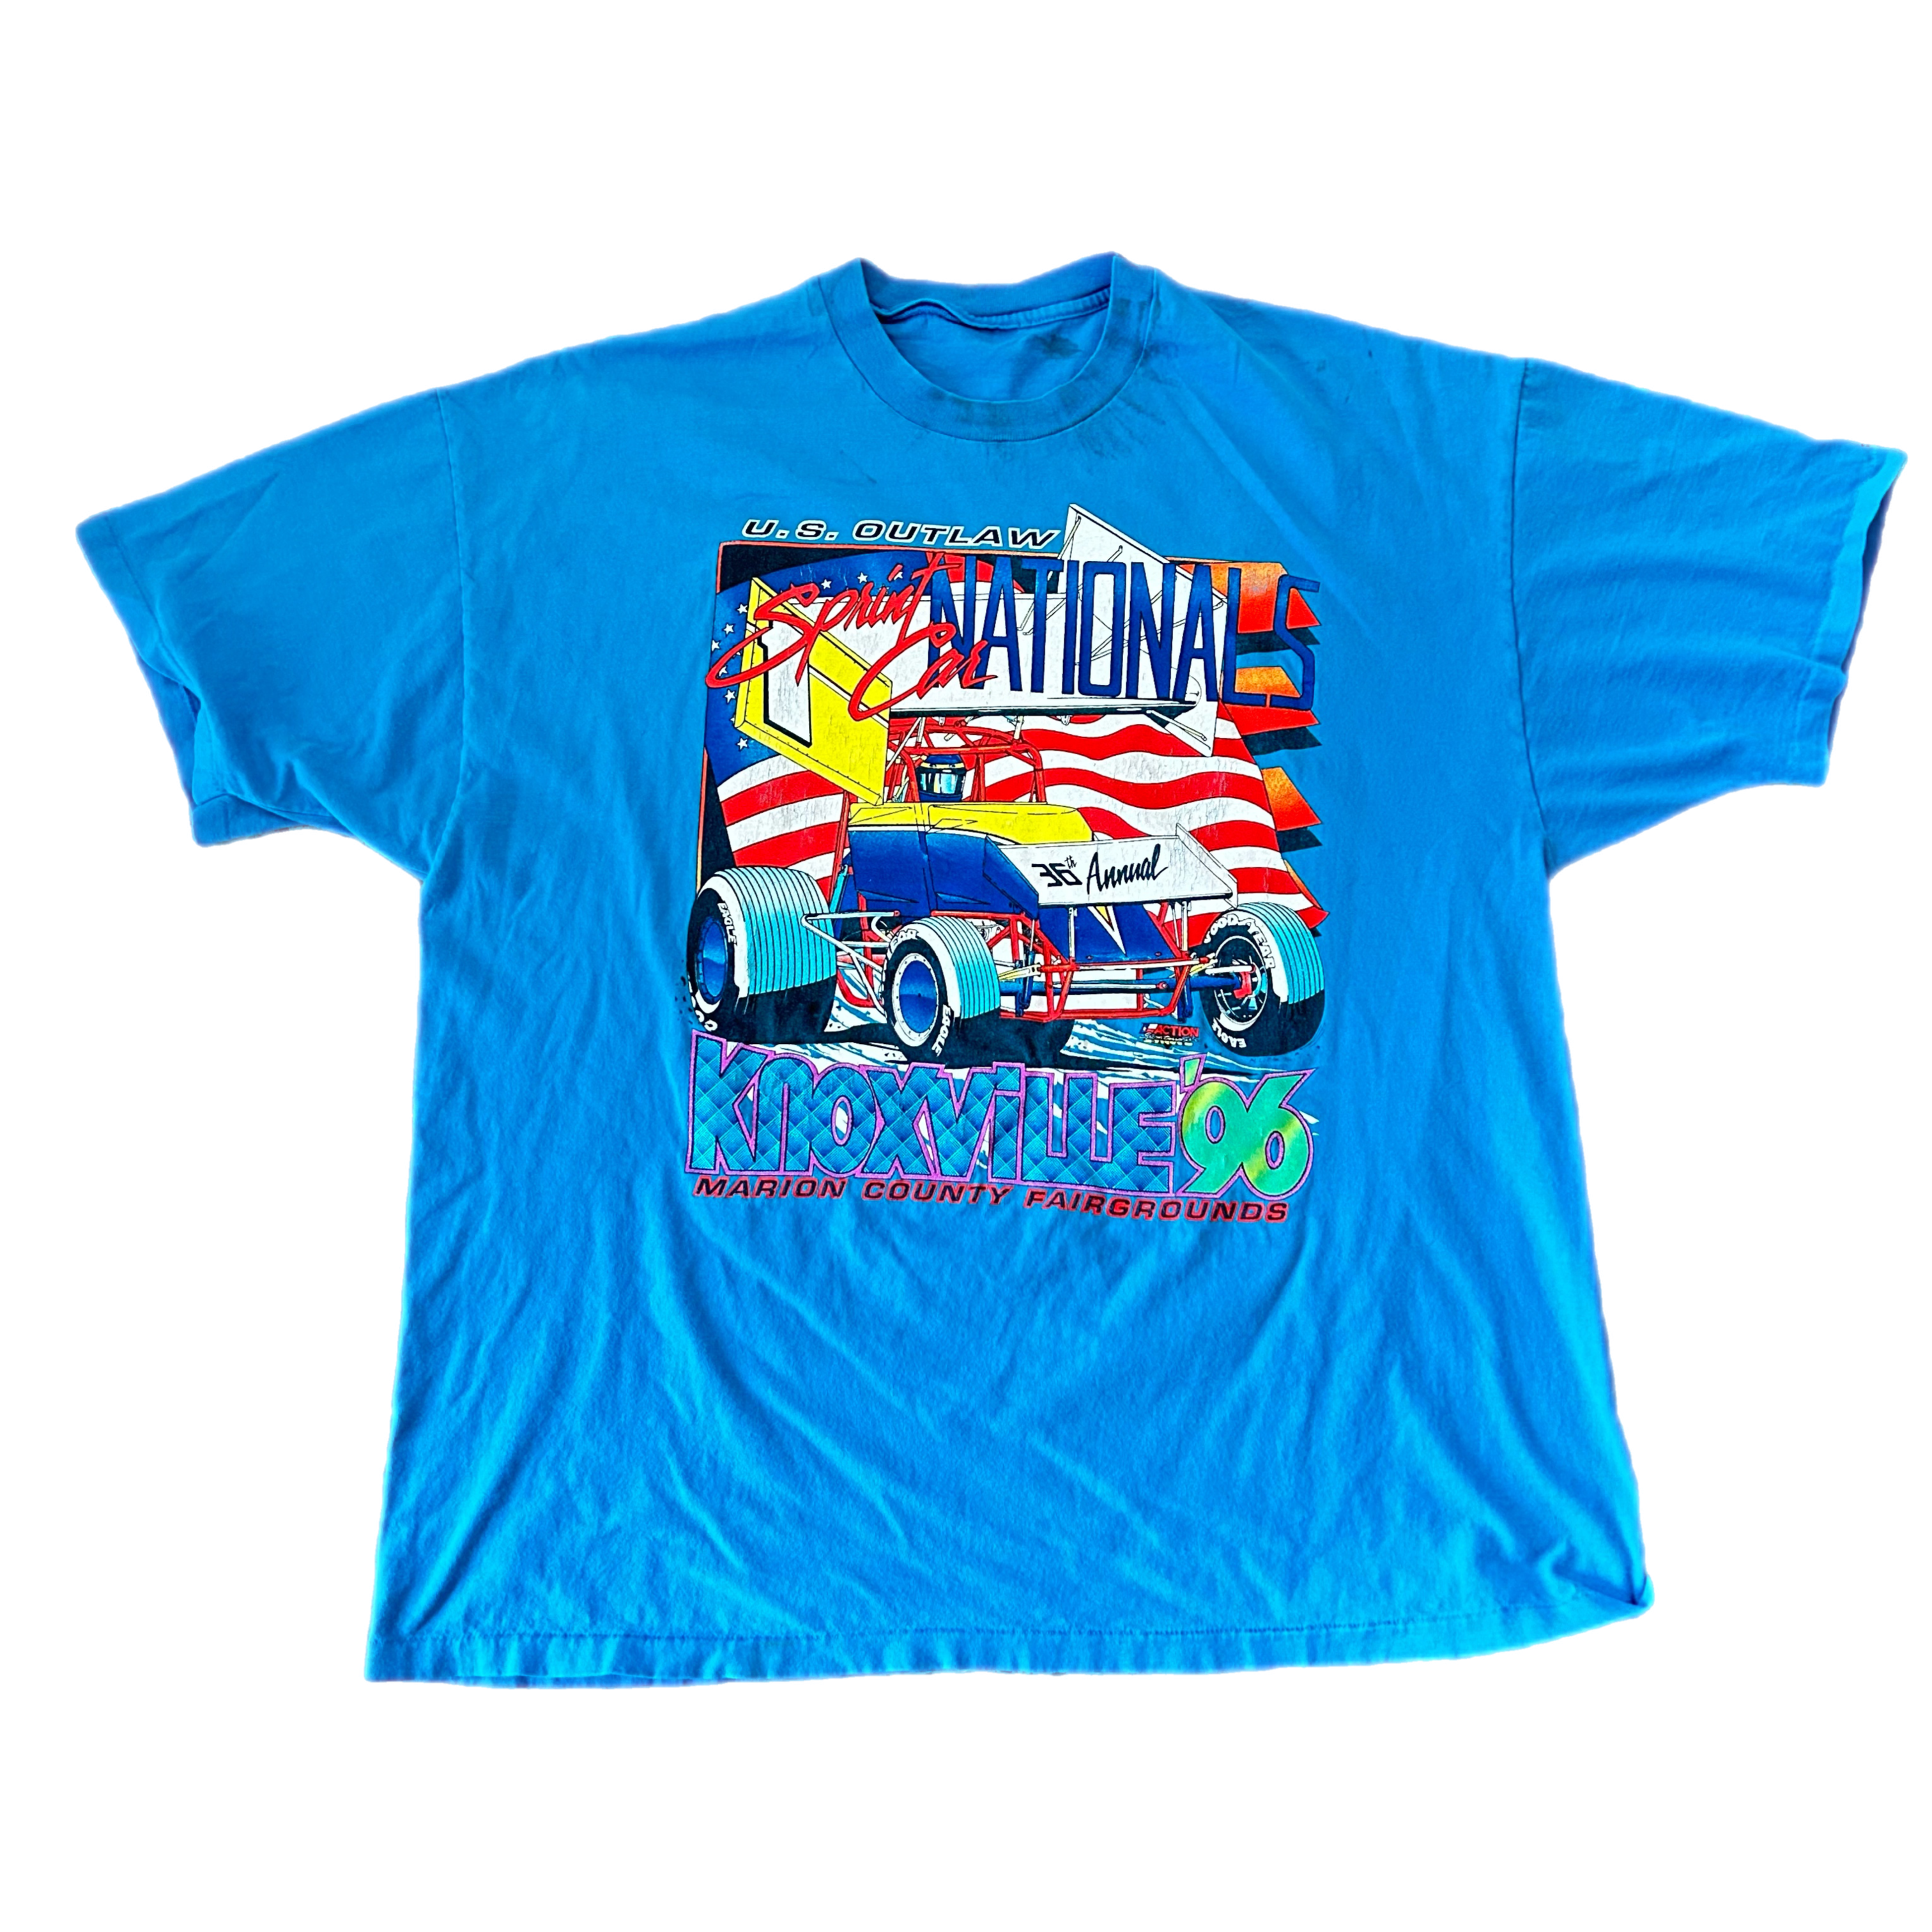 Vintage 1990s US Outlaw Nationals Racing Tee